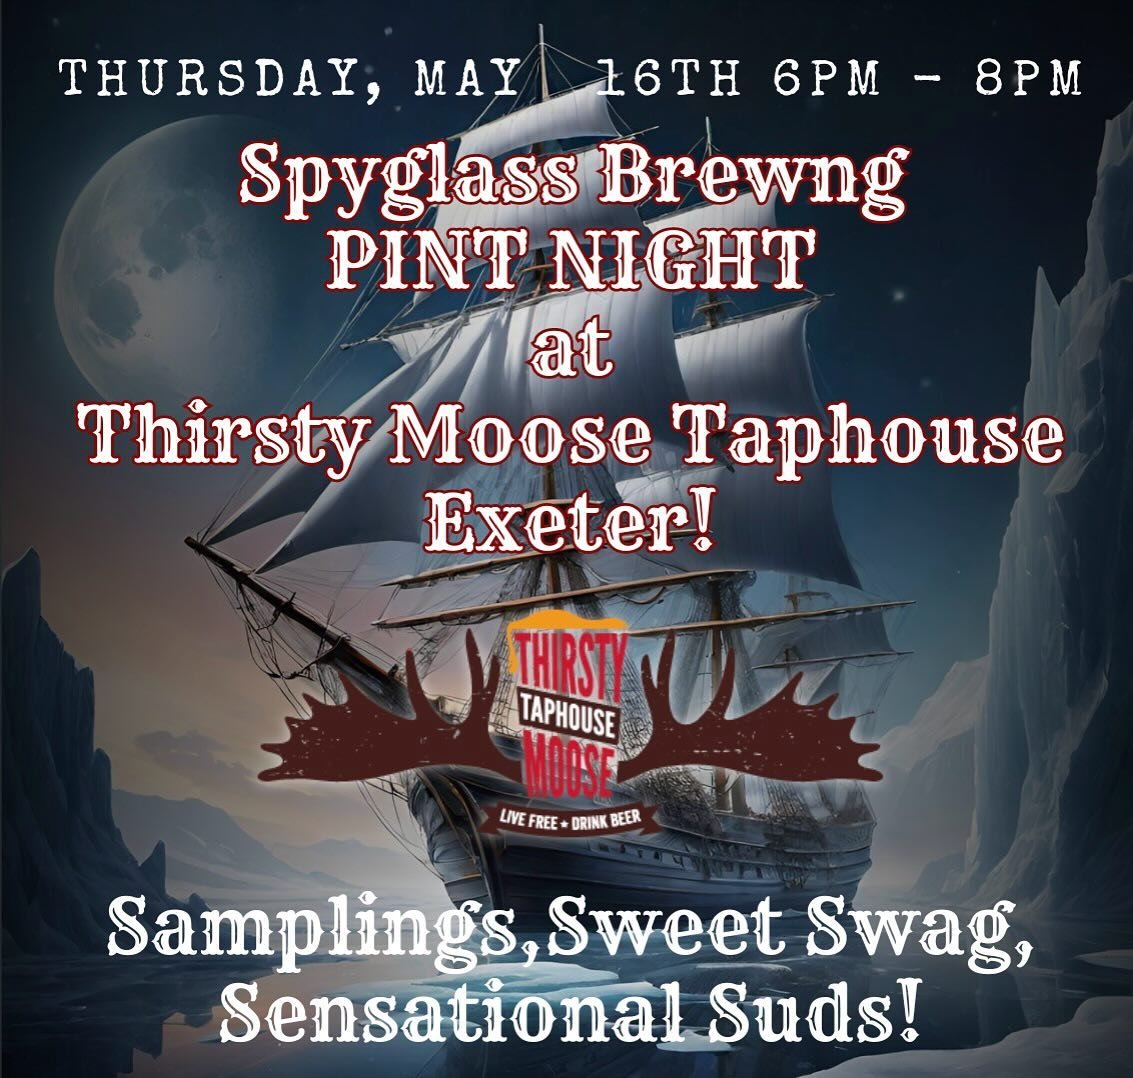 The Spyglass team is heading to Thirsty Moose Taphouse Exeter, NH!

PINT NIGHT - Samples, Swag, Sensational Suds!

Stop by and hang with the team, grab a pint of Spyglass on draft, and a chance to take home some sweet one of a kind swag! 

See you Ma